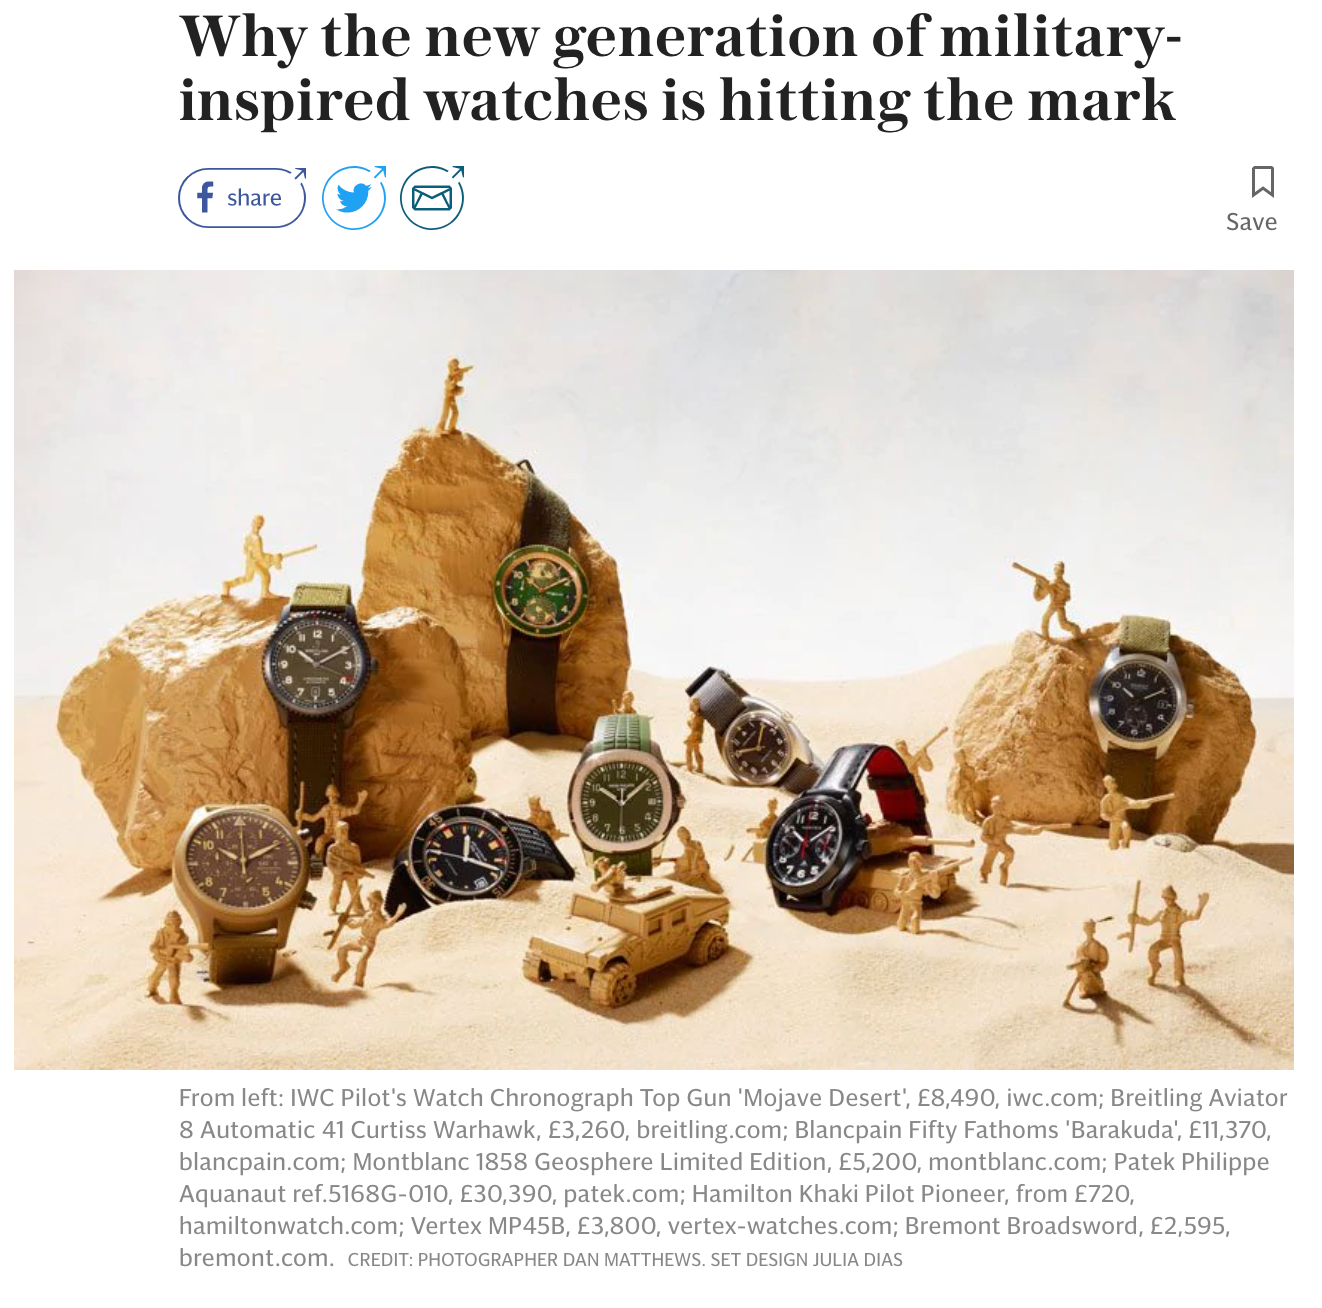 Telegraph Time - New generation military-inspired watches hitting the mark